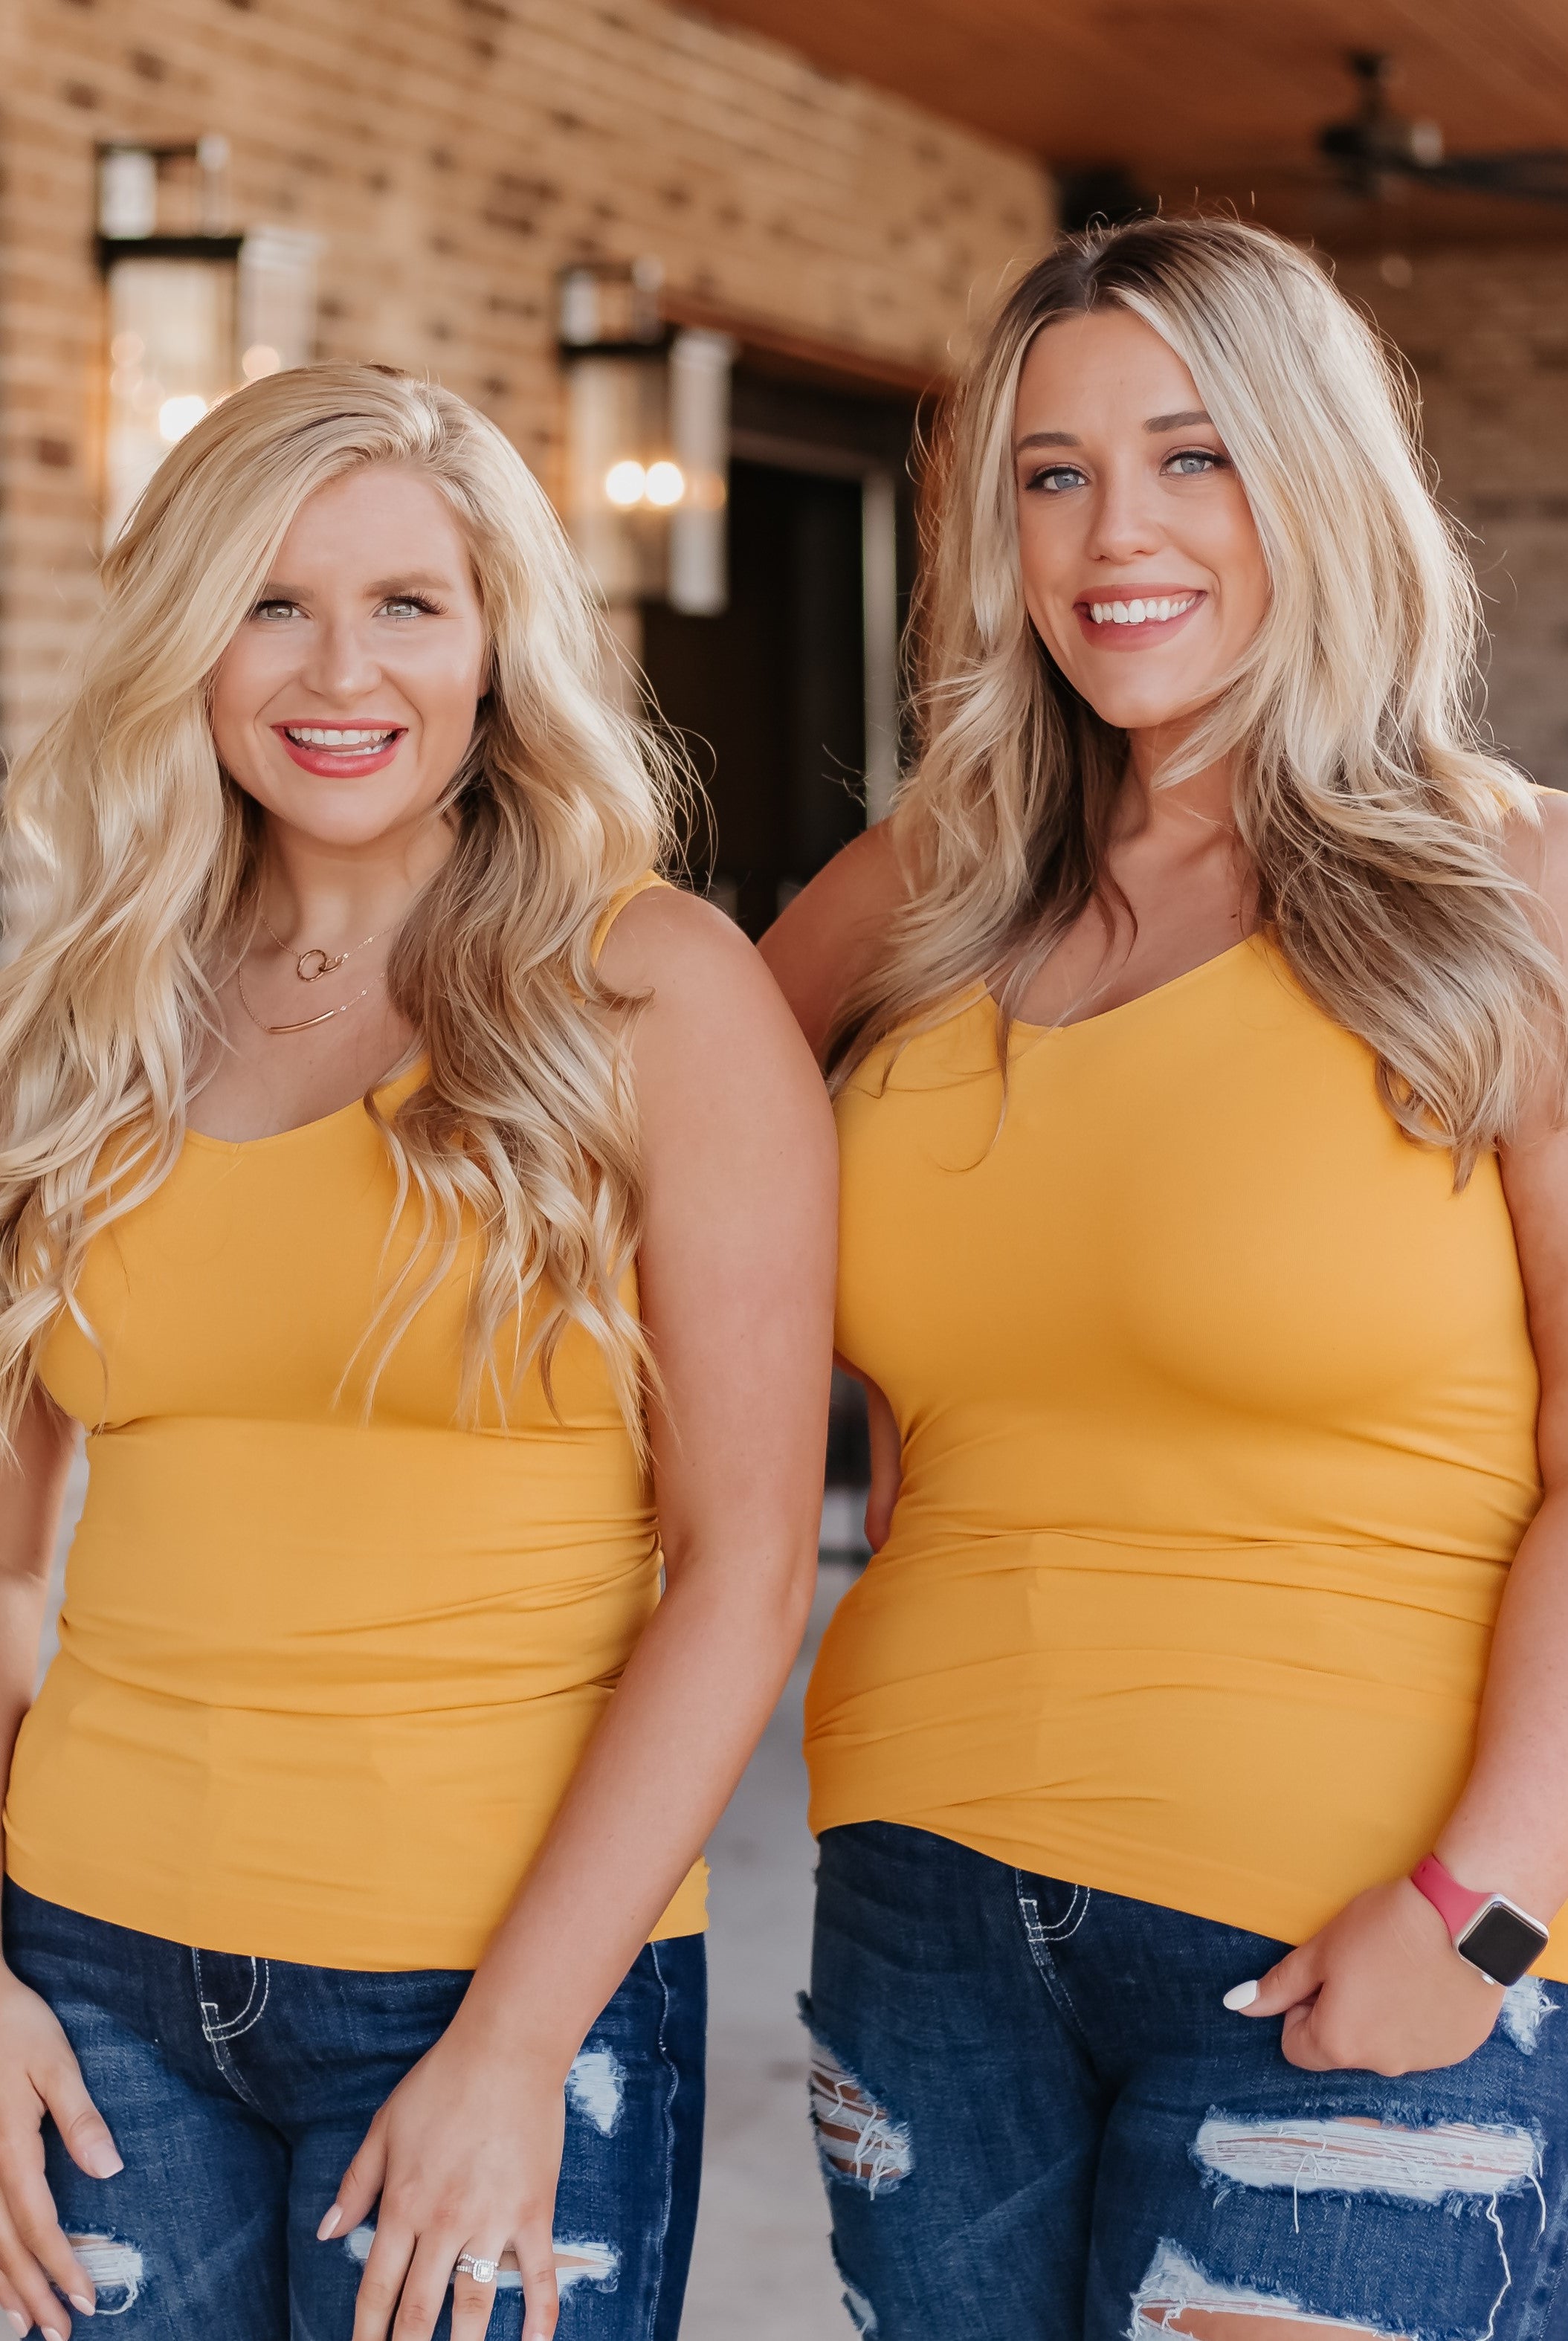 Cathy Basic Reversible Seamless Tank ~ Mustard - Be You Boutique